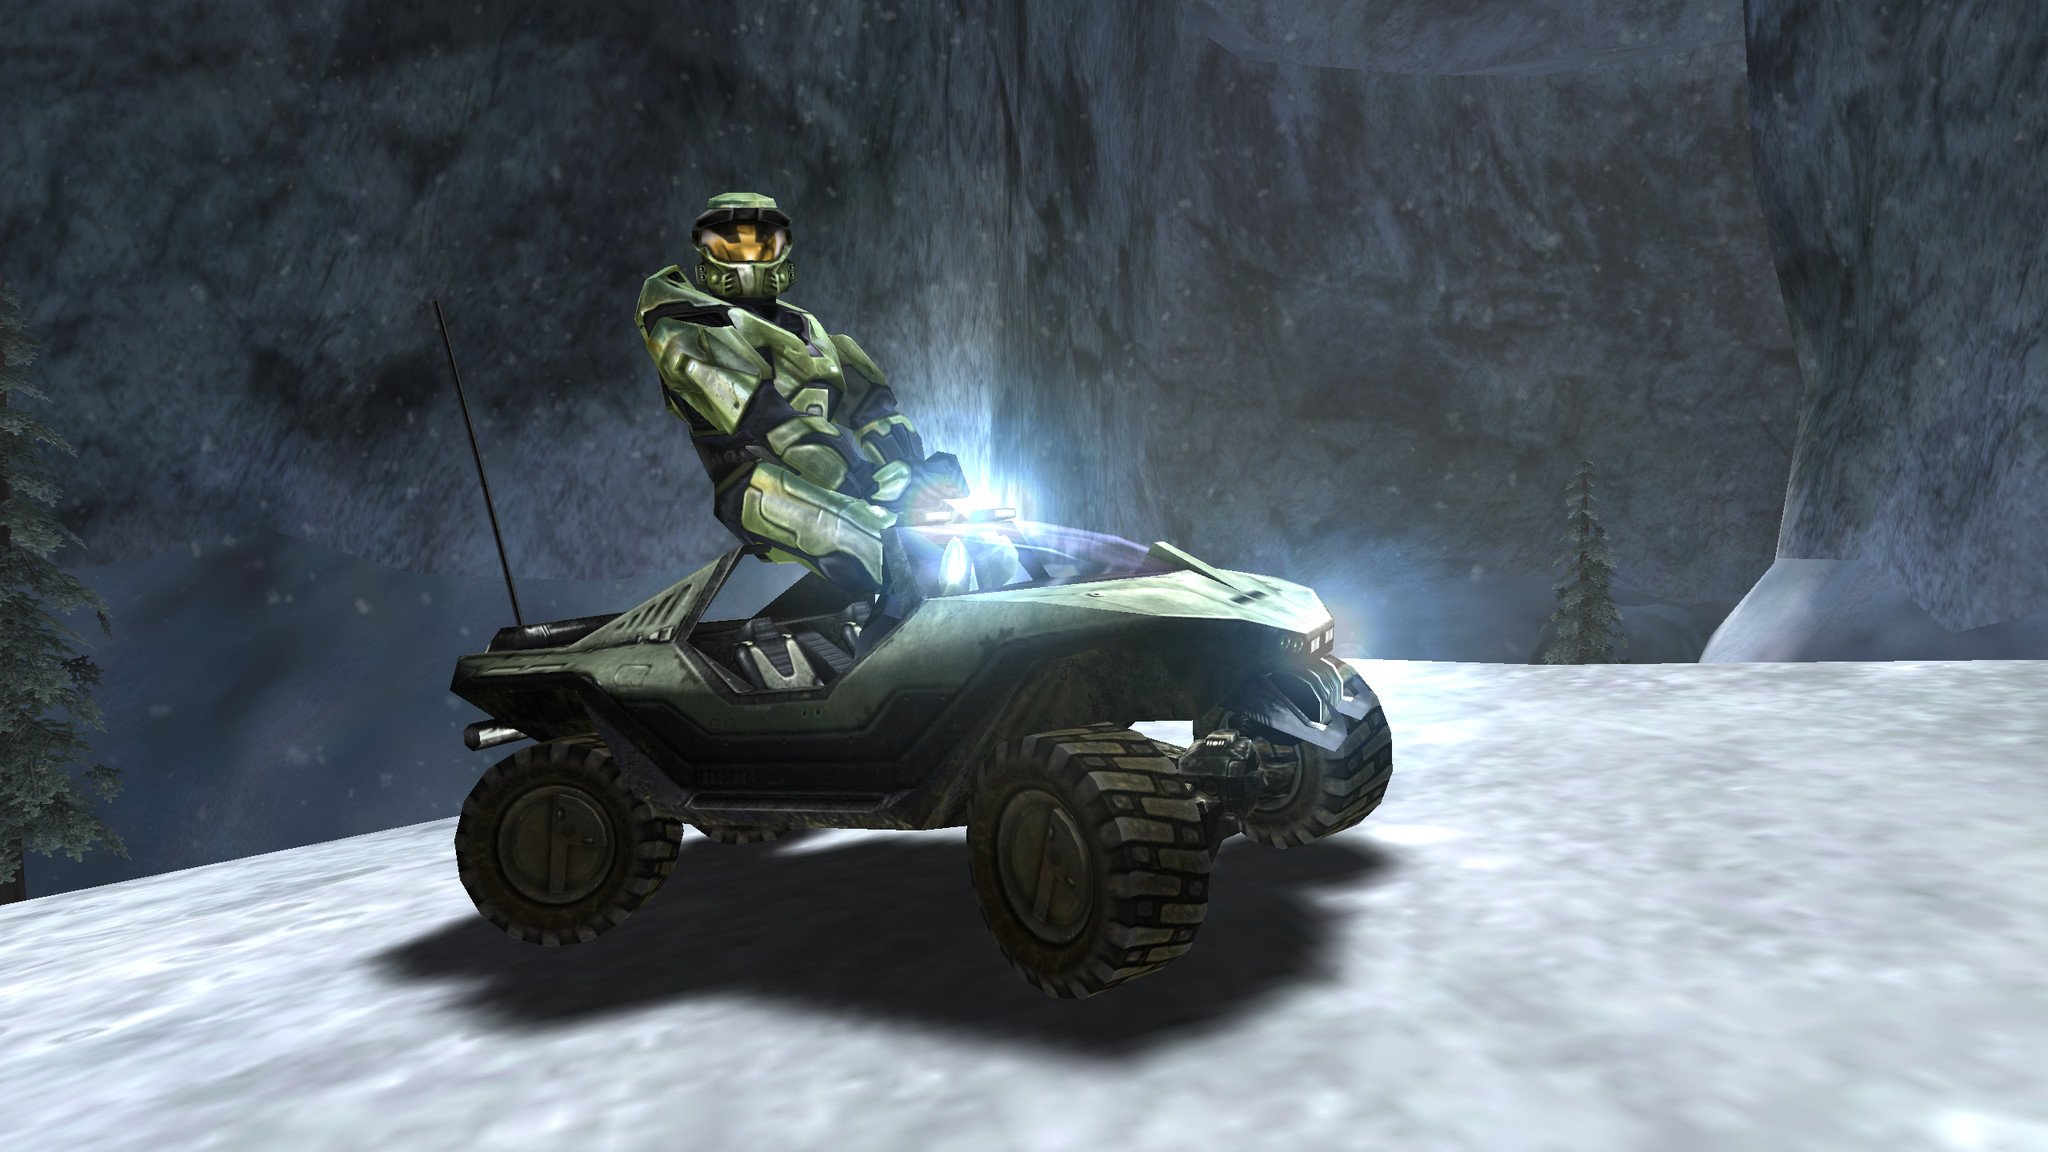 This mod transforms Halo: Combat Evolved into a cursed nightmare.